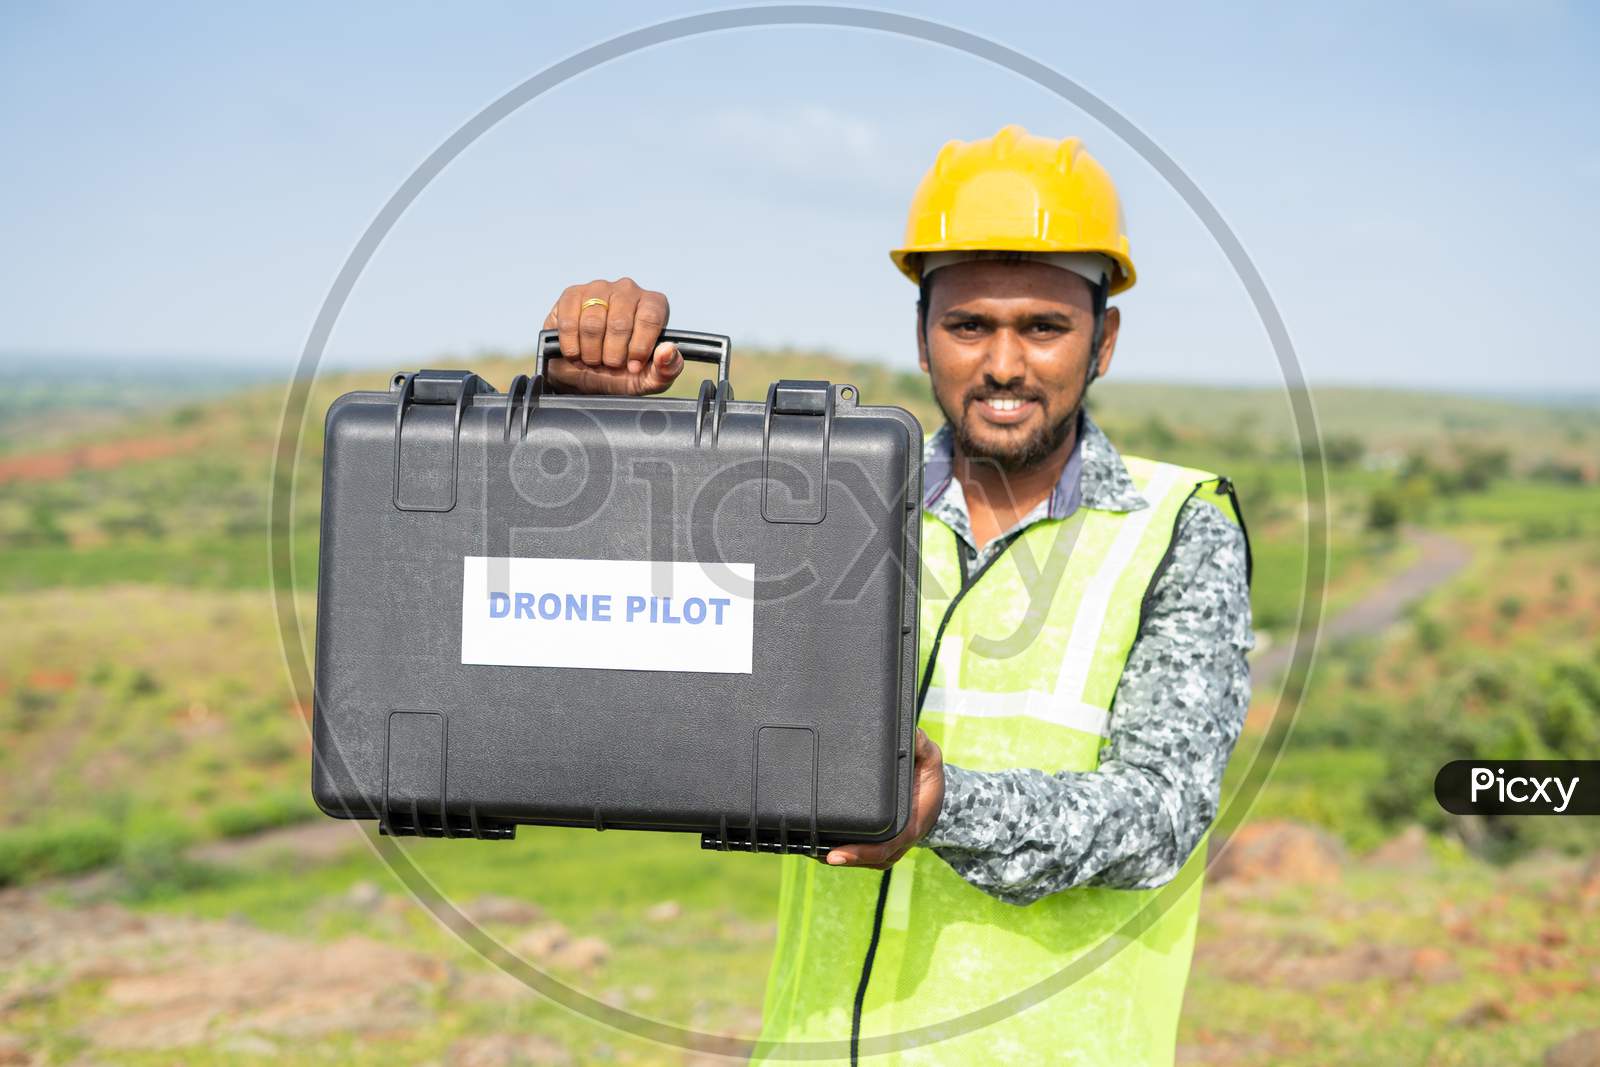 Focus On Case Drone, Pilot With Protective Work Wear And Hard Hat Showing Drone Case By Looking Camera - Concept Of Professional Uav Operator Or Aerial Filmmaker